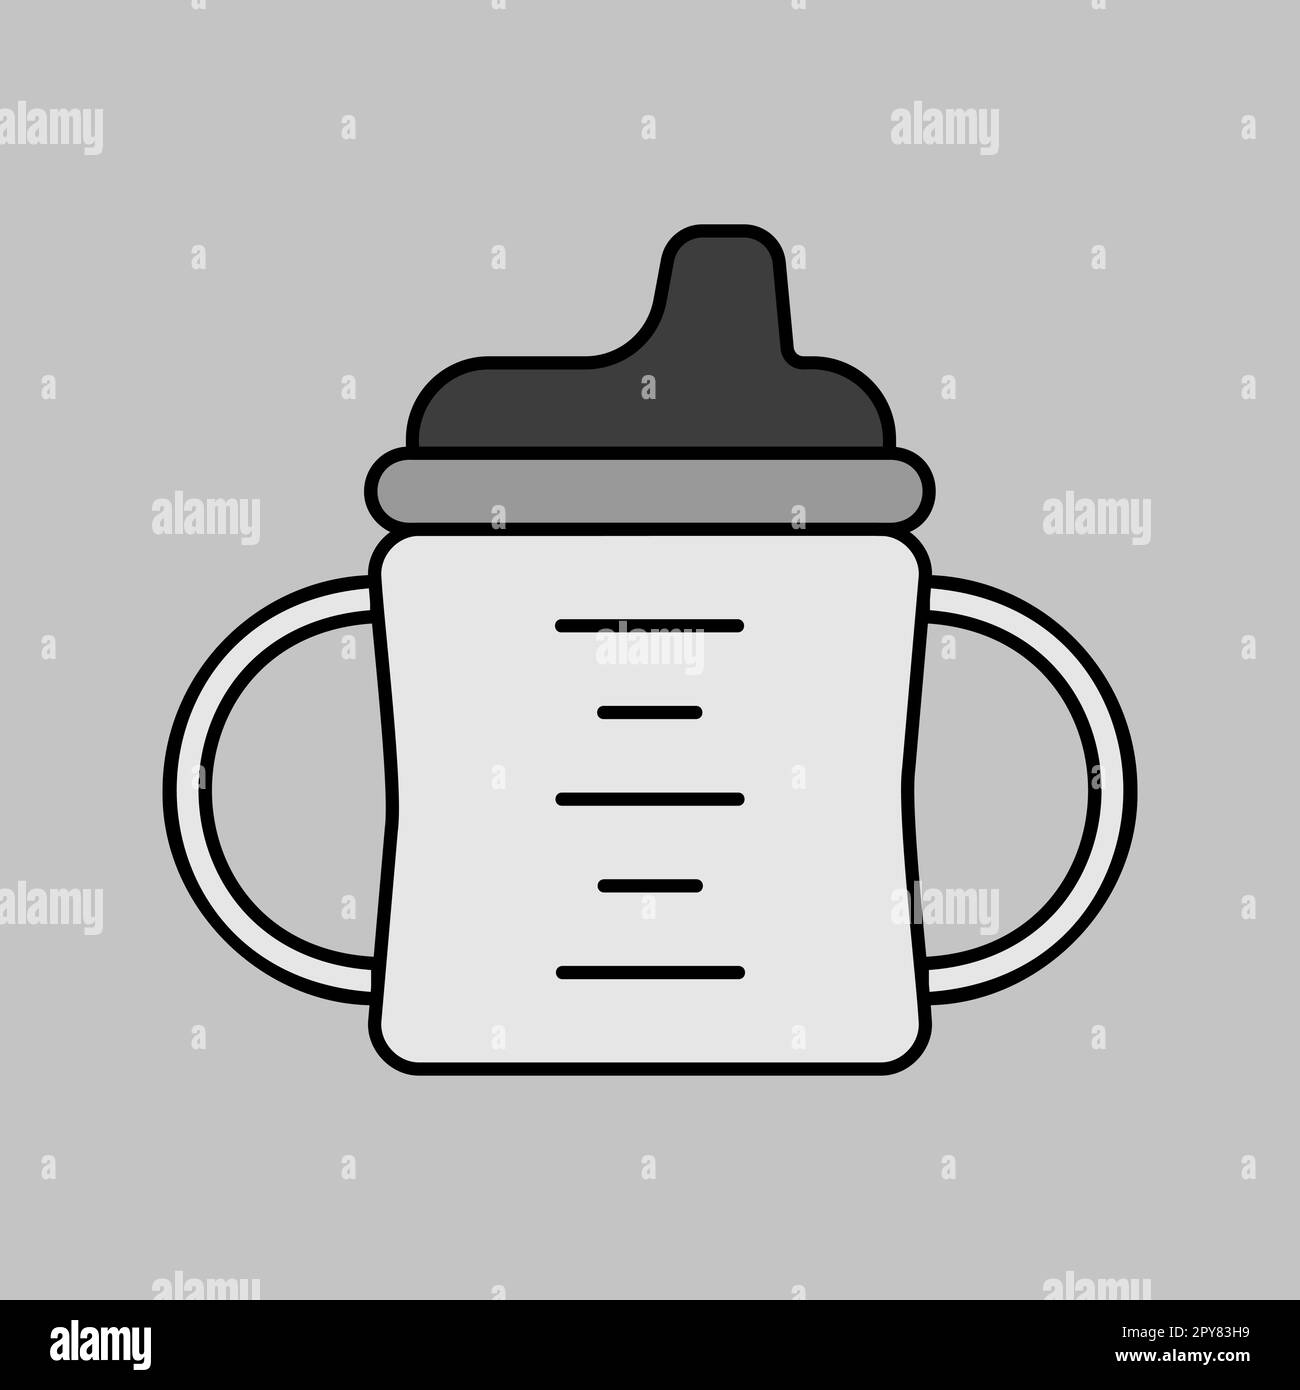 https://c8.alamy.com/comp/2PY83H9/toddler-sippy-cup-isolated-vector-grayscale-icon-graph-symbol-for-children-and-newborn-babies-web-site-and-apps-design-logo-app-ui-2PY83H9.jpg